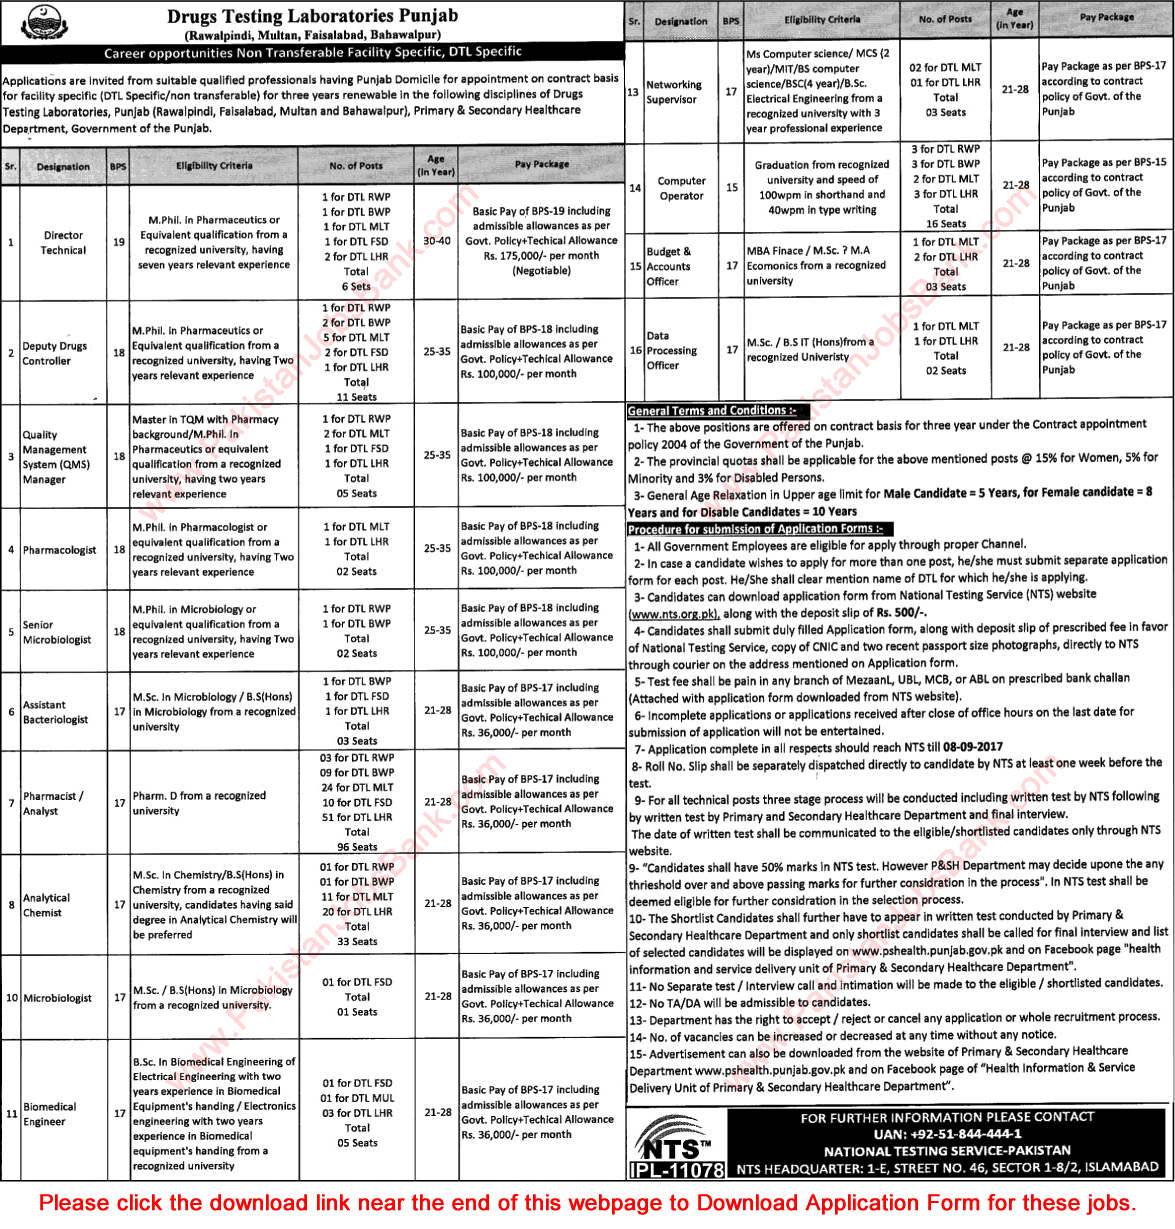 Drugs Testing Laboratories Punjab Jobs 2017 August NTS Application Form Pharmacists / Analysts & Others Latest